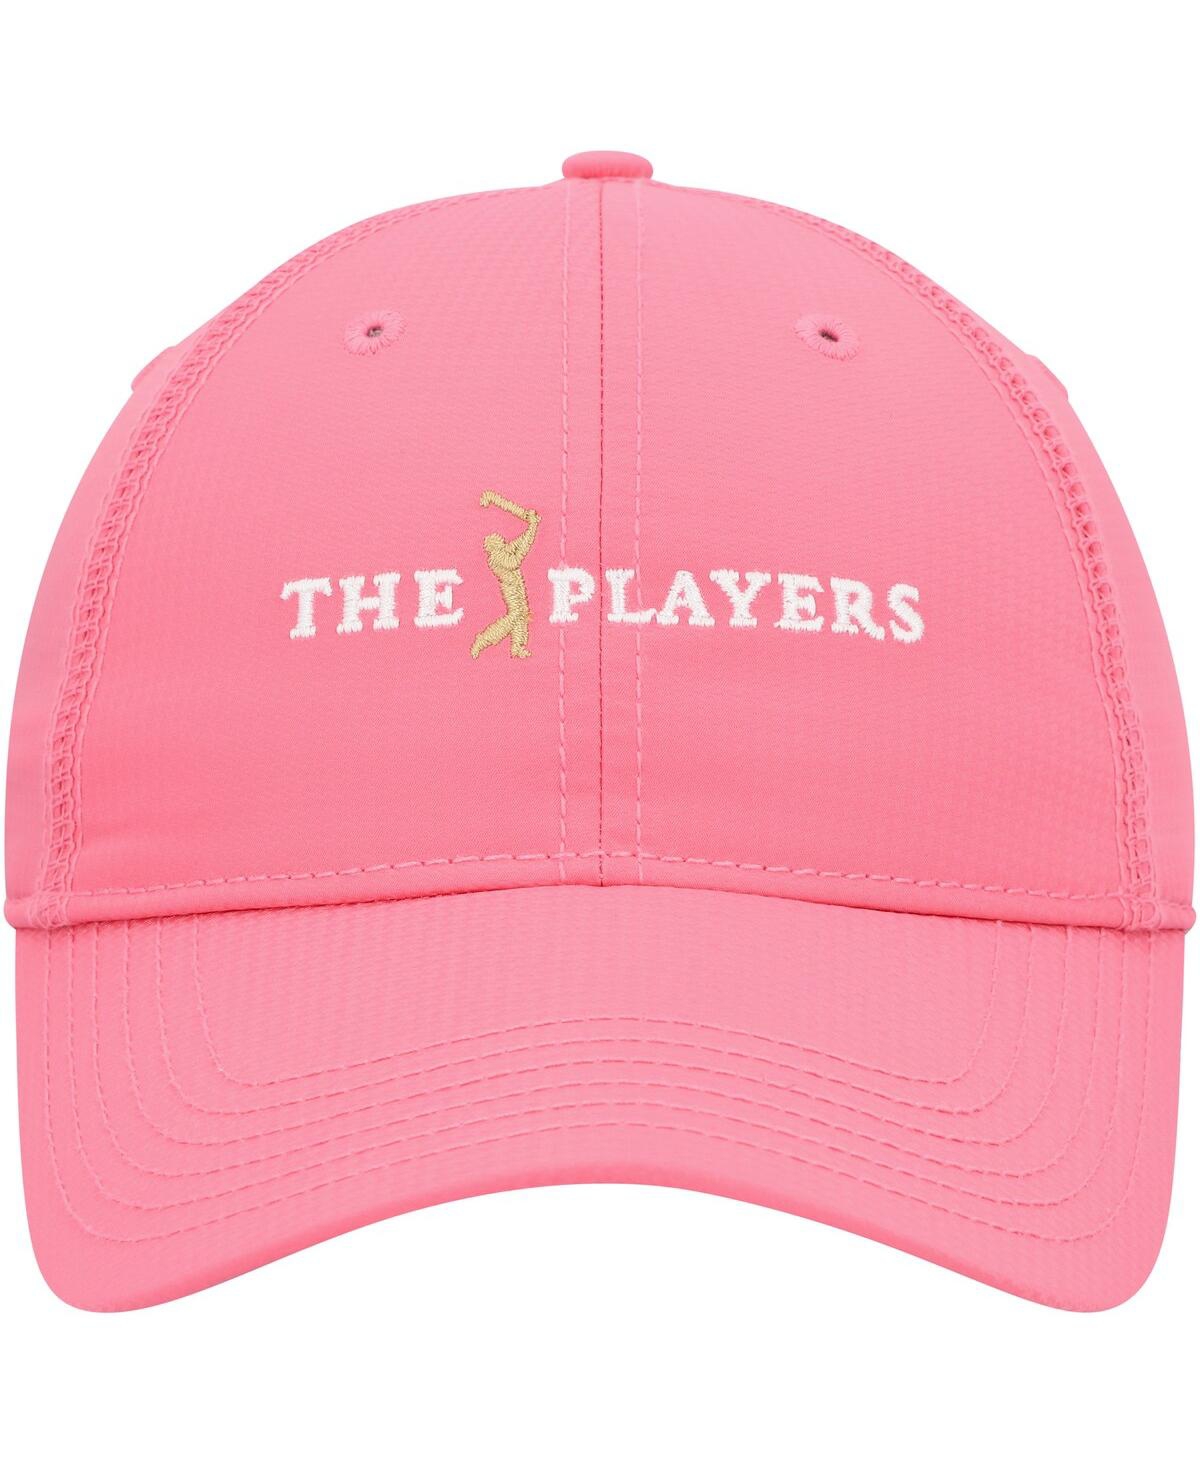 Shop Ahead Women's  Light Pink The Players Marion Adjustable Hat